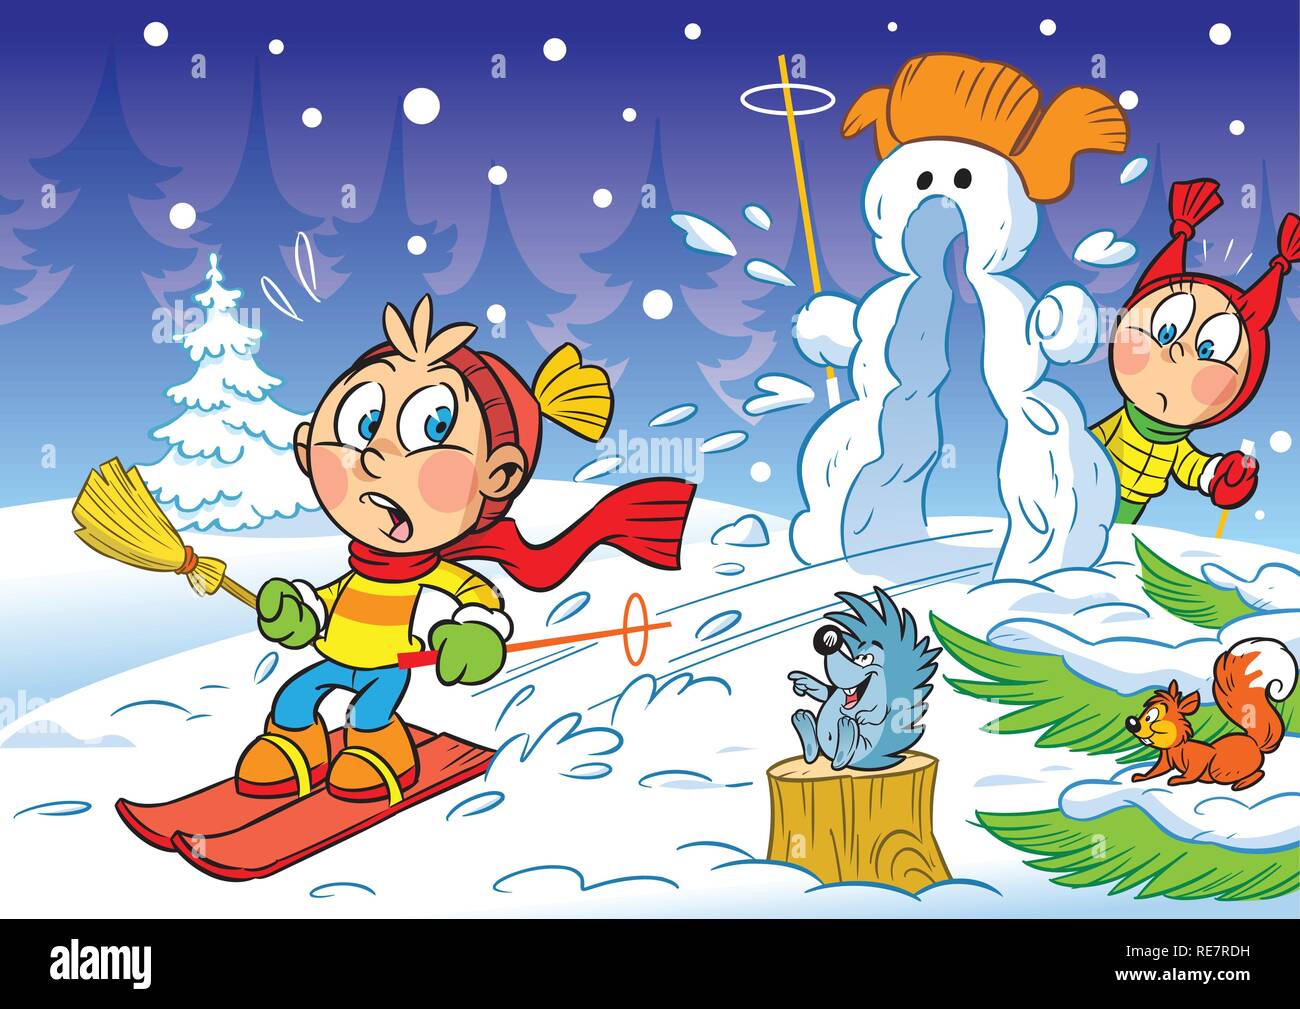 The illustration shows children skiing down the hills in the winter and snowman. Illustration done in cartoon style. Stock Vector